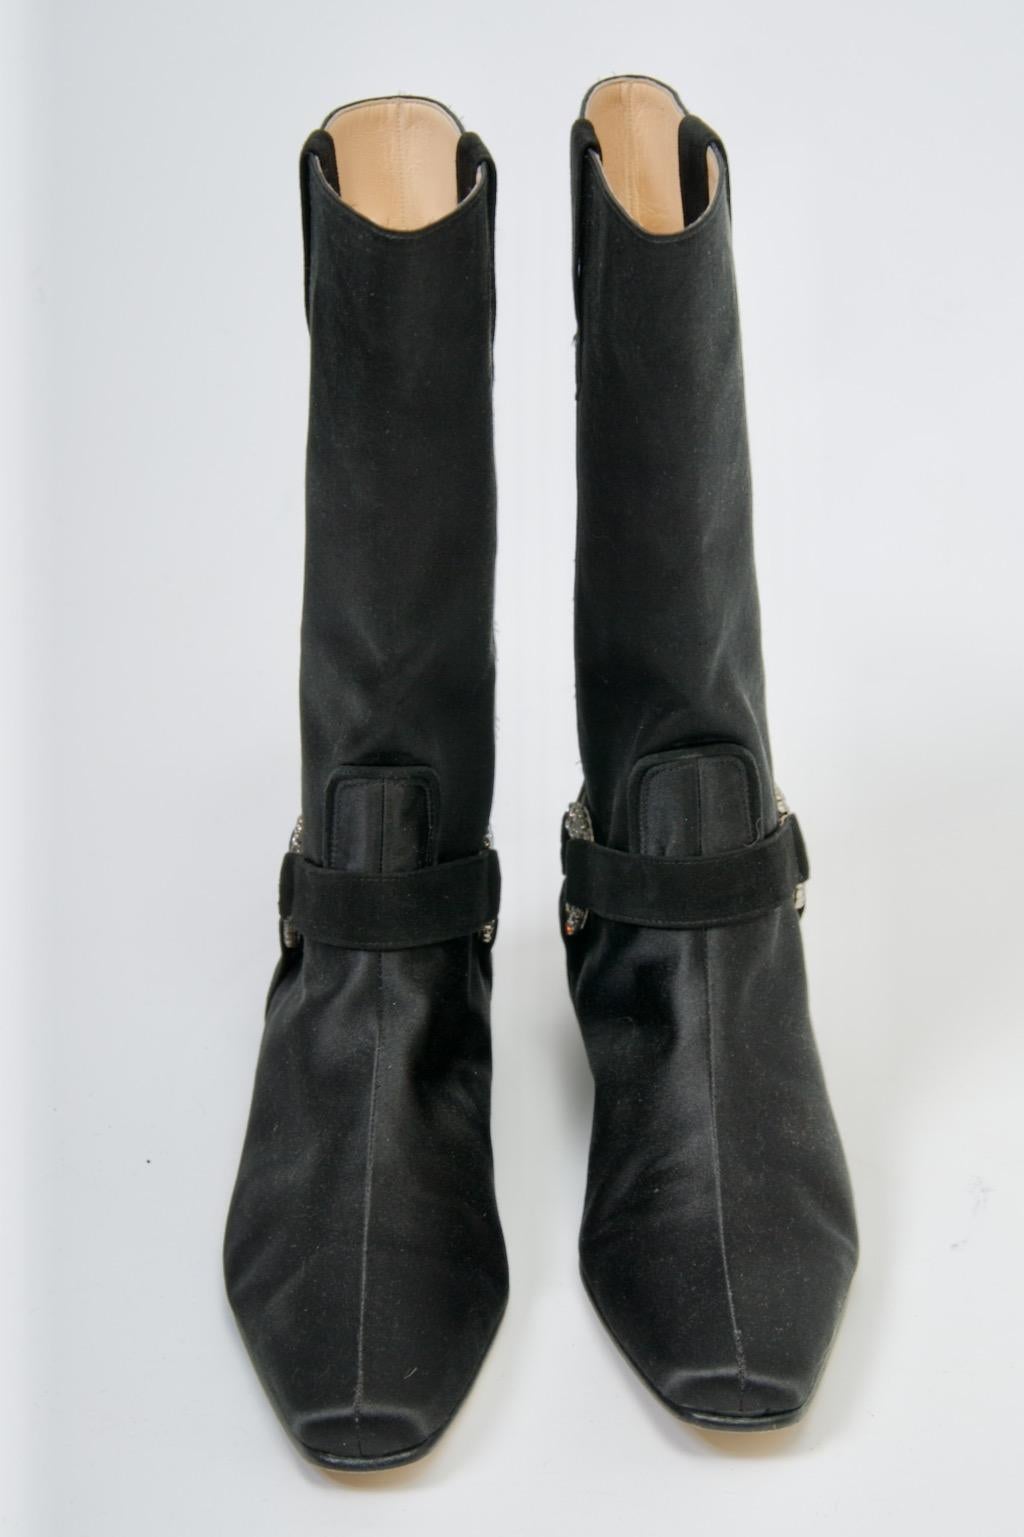 Manolo Blahnik Black Satin Evening Boots In Excellent Condition For Sale In Alford, MA